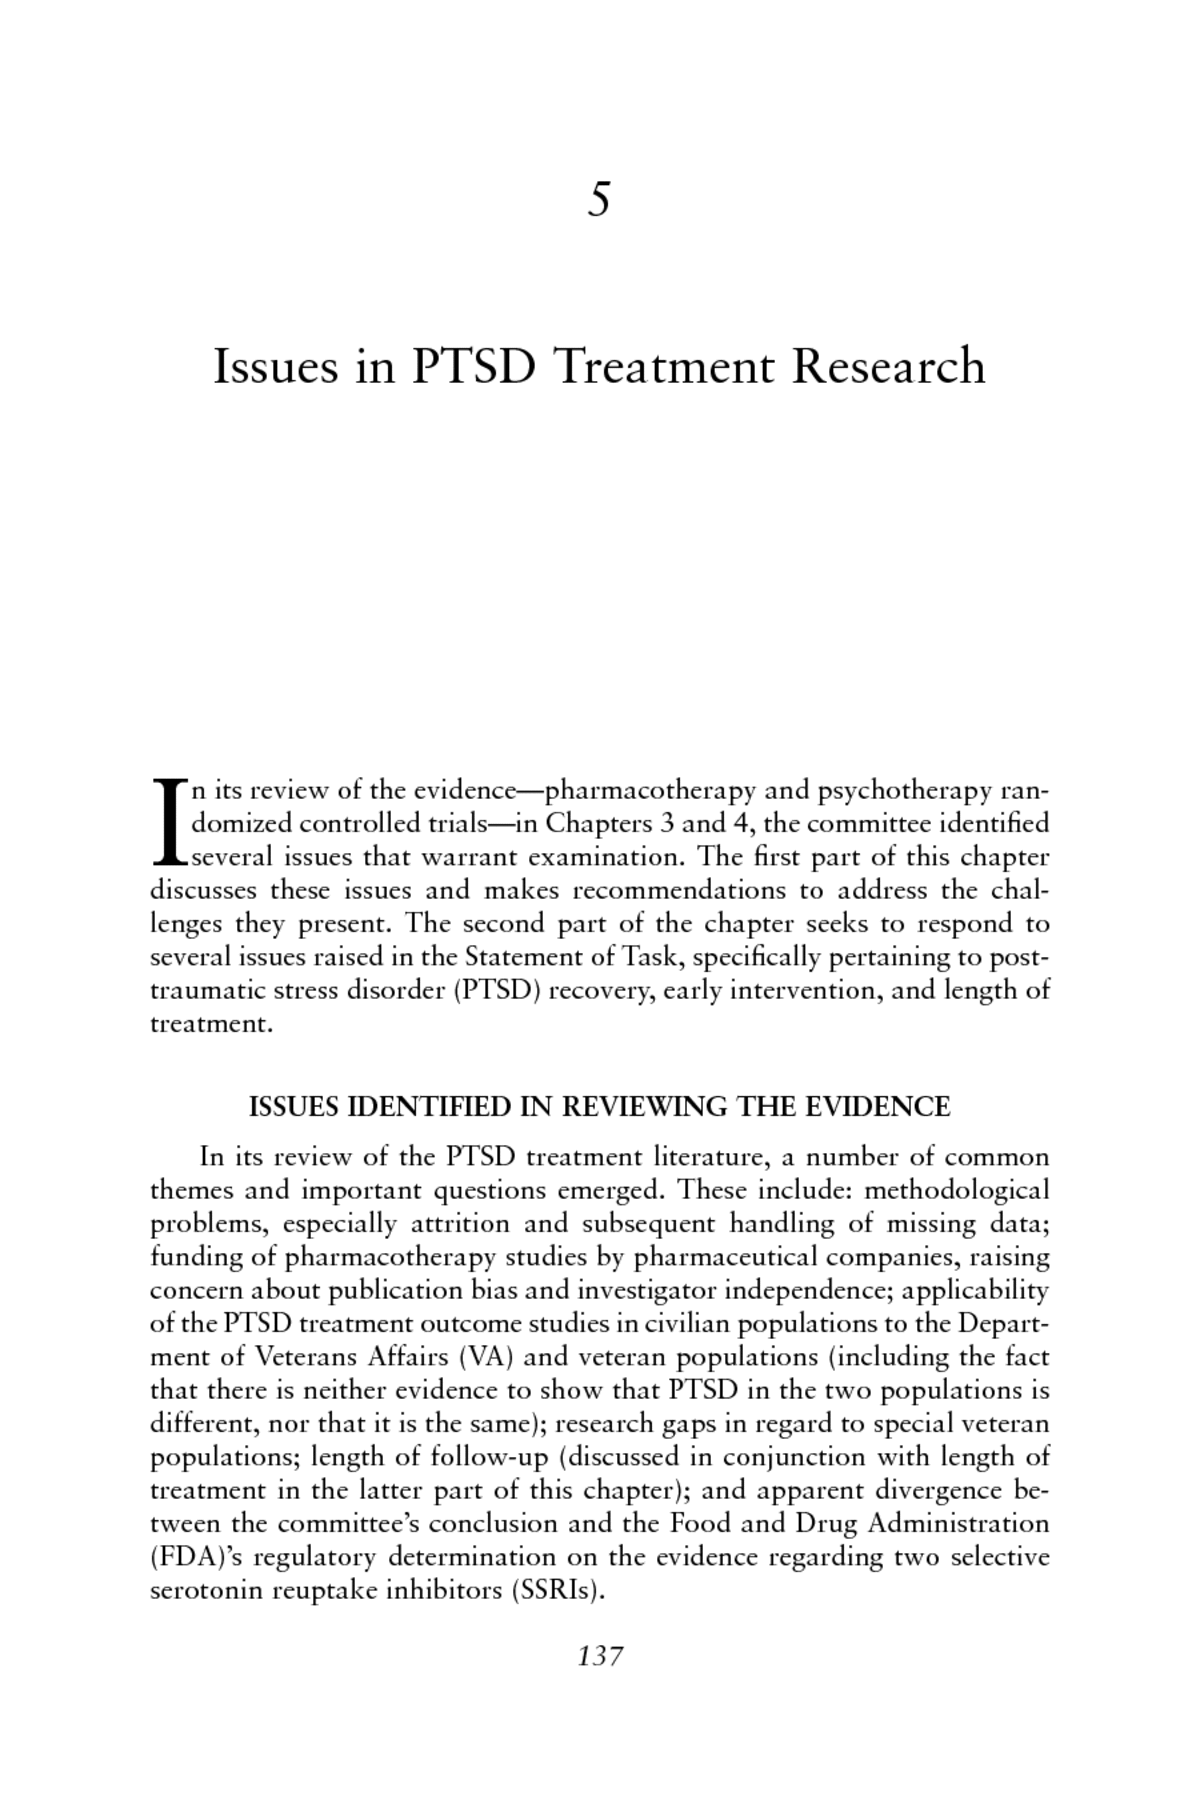 thesis on post traumatic stress disorder